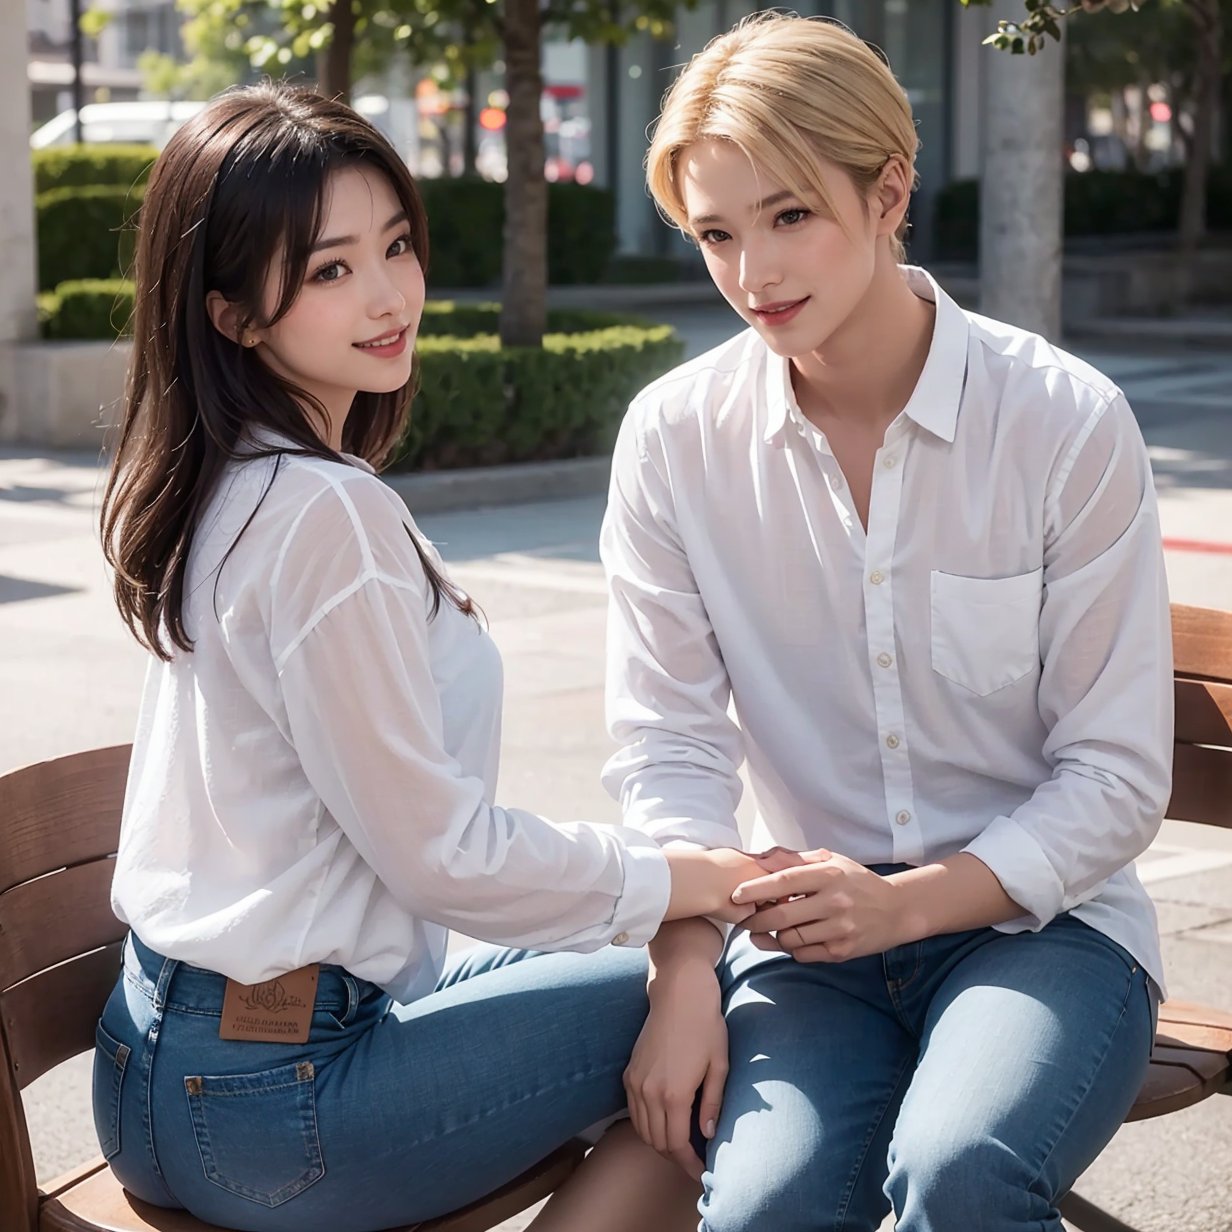 A stunning photorealistic masterpiece of an Asian woman and man in a romantic setting, surrounded by （beachside freshy sunlights )).The woman, with blonde hair and natural skin texture, wears long sleeve white OL shirt,and sexy jeans, posing dynamically with a smile, against a dimly lit shaded plaza background.((Night ambient, night  scene, cinematic photorealistic shooting,light and shadow.)),cloceup halfbody photography. sitting on chair, back view. looking at camera.
Her eyes are finely detailed with a hint of blush, as she looks directly leftside of the viewer. The scene is captured in breathtaking 8K detail, with film grain and a shallow depth of field, showcasing the beauty of their natural skin texture and the intricate flower arrangement.
